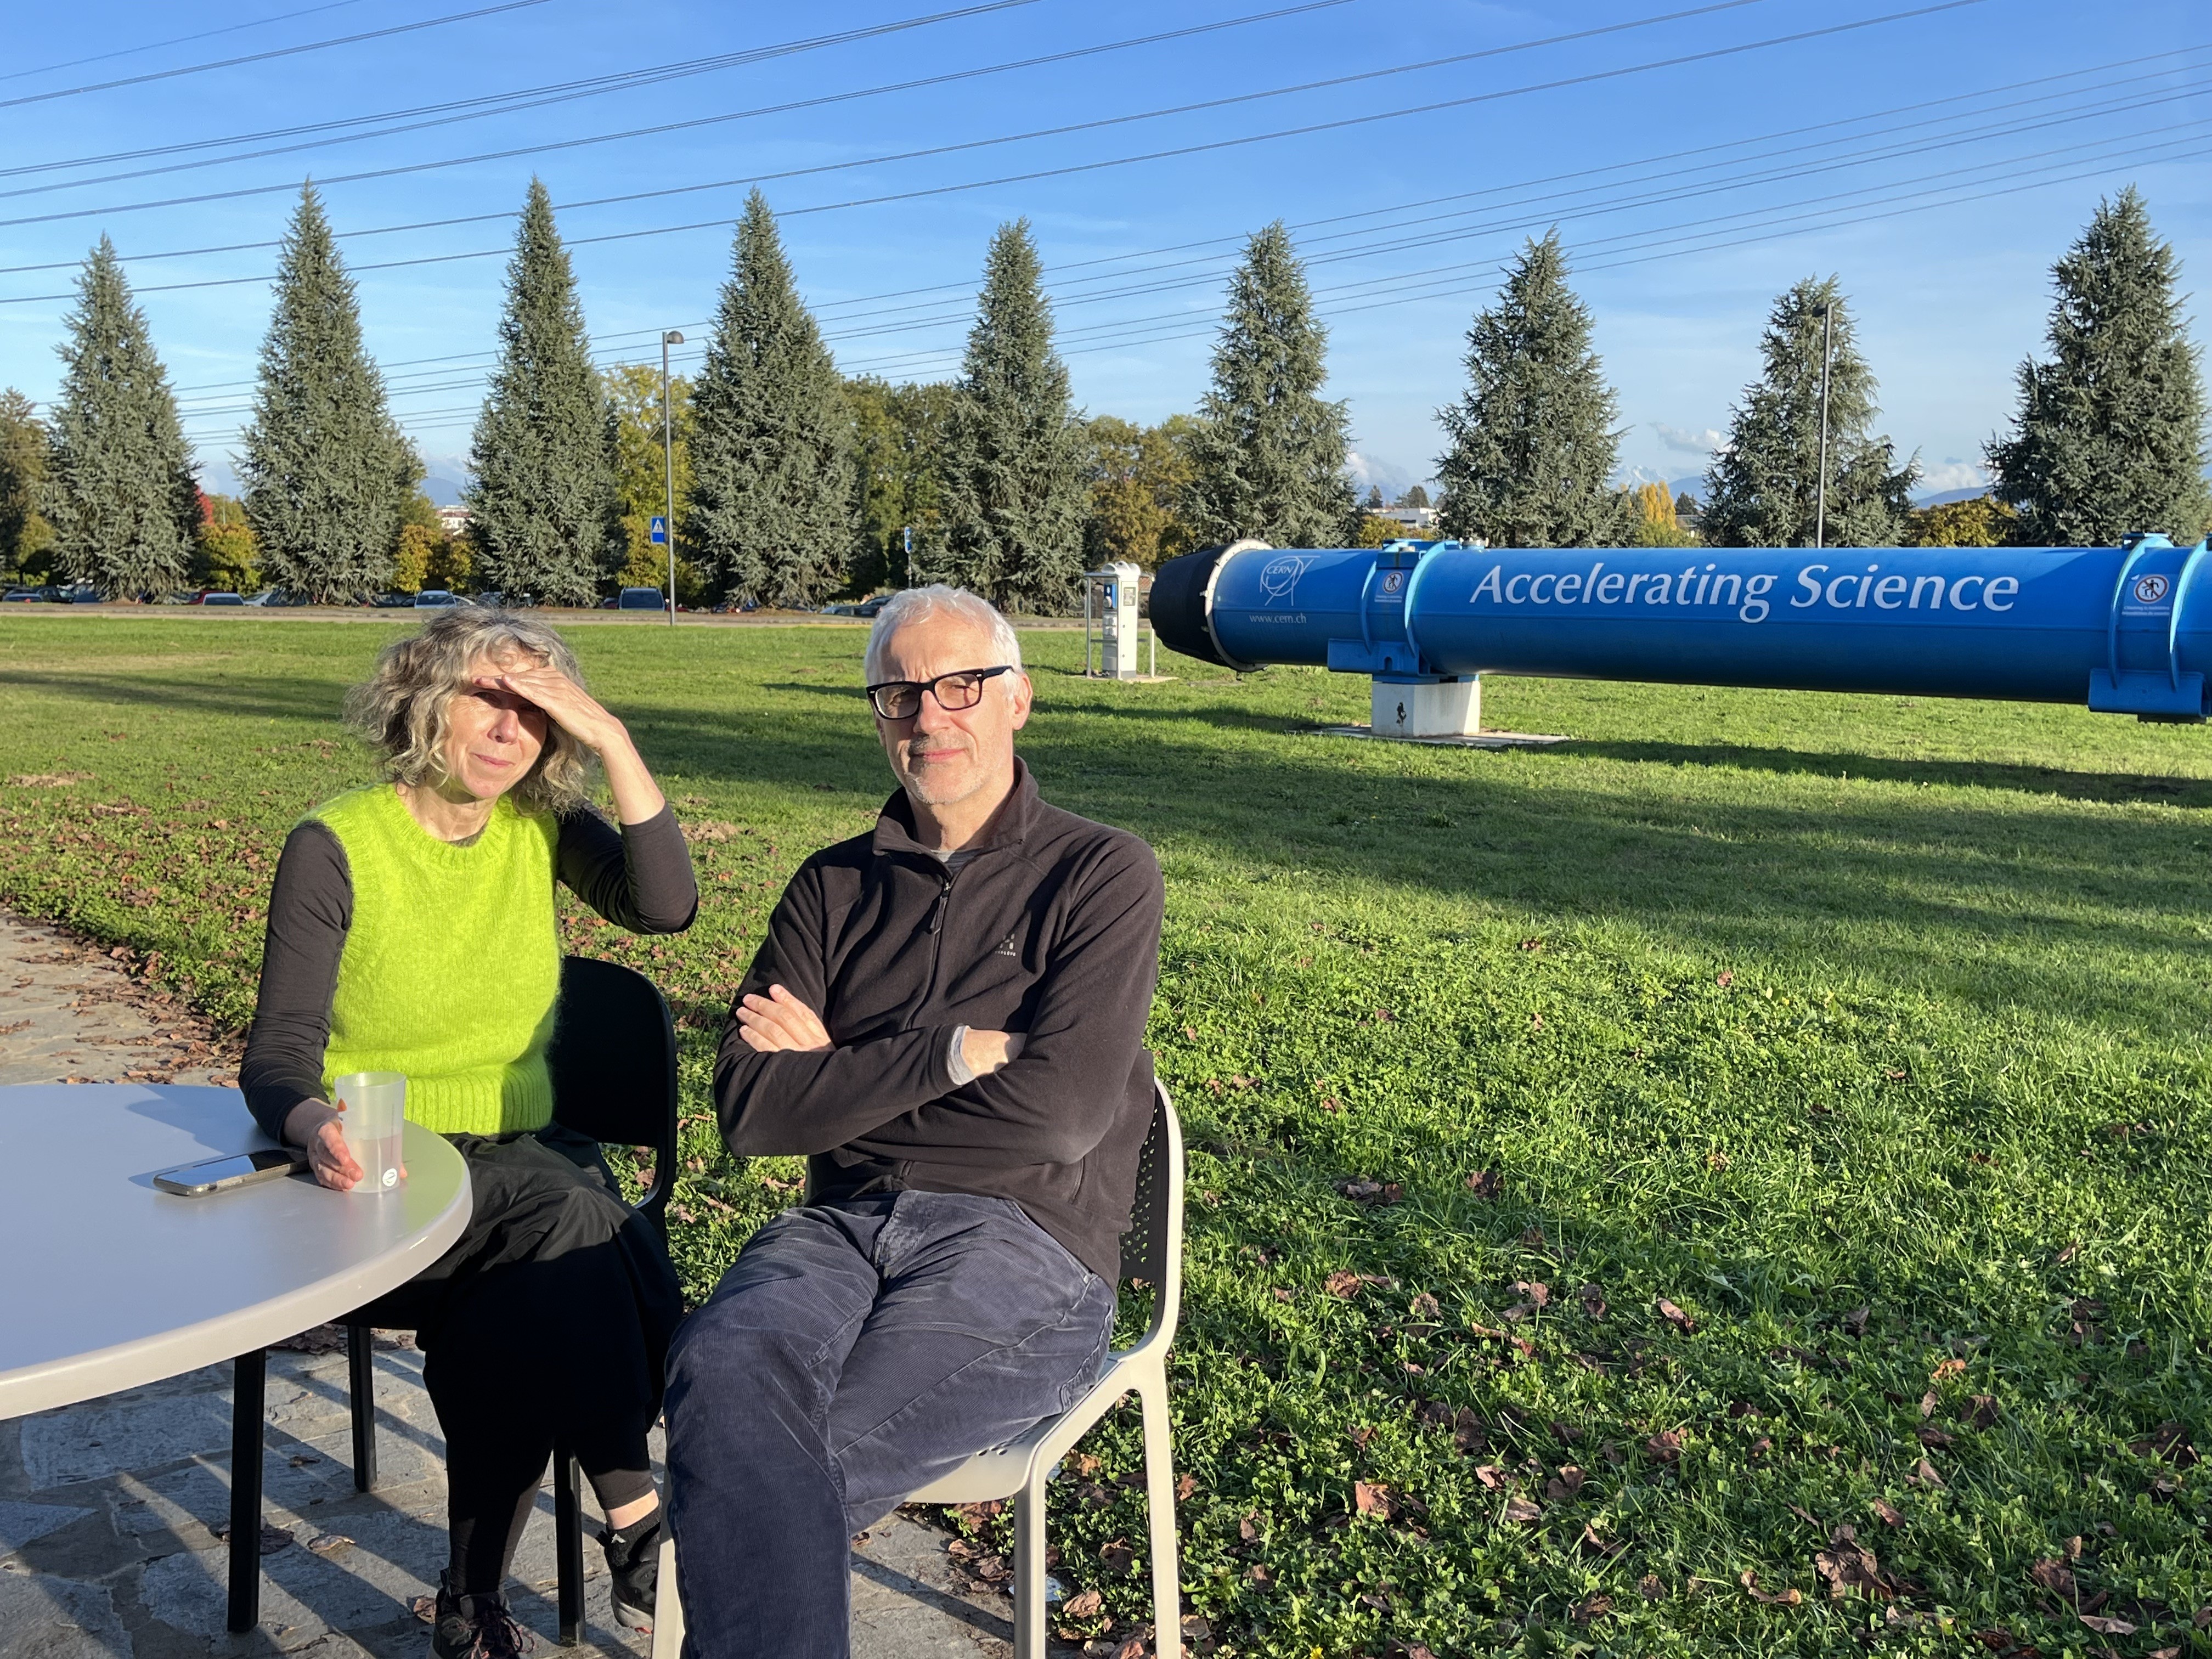 Anthony Dunne & Fiona Raby at CERN